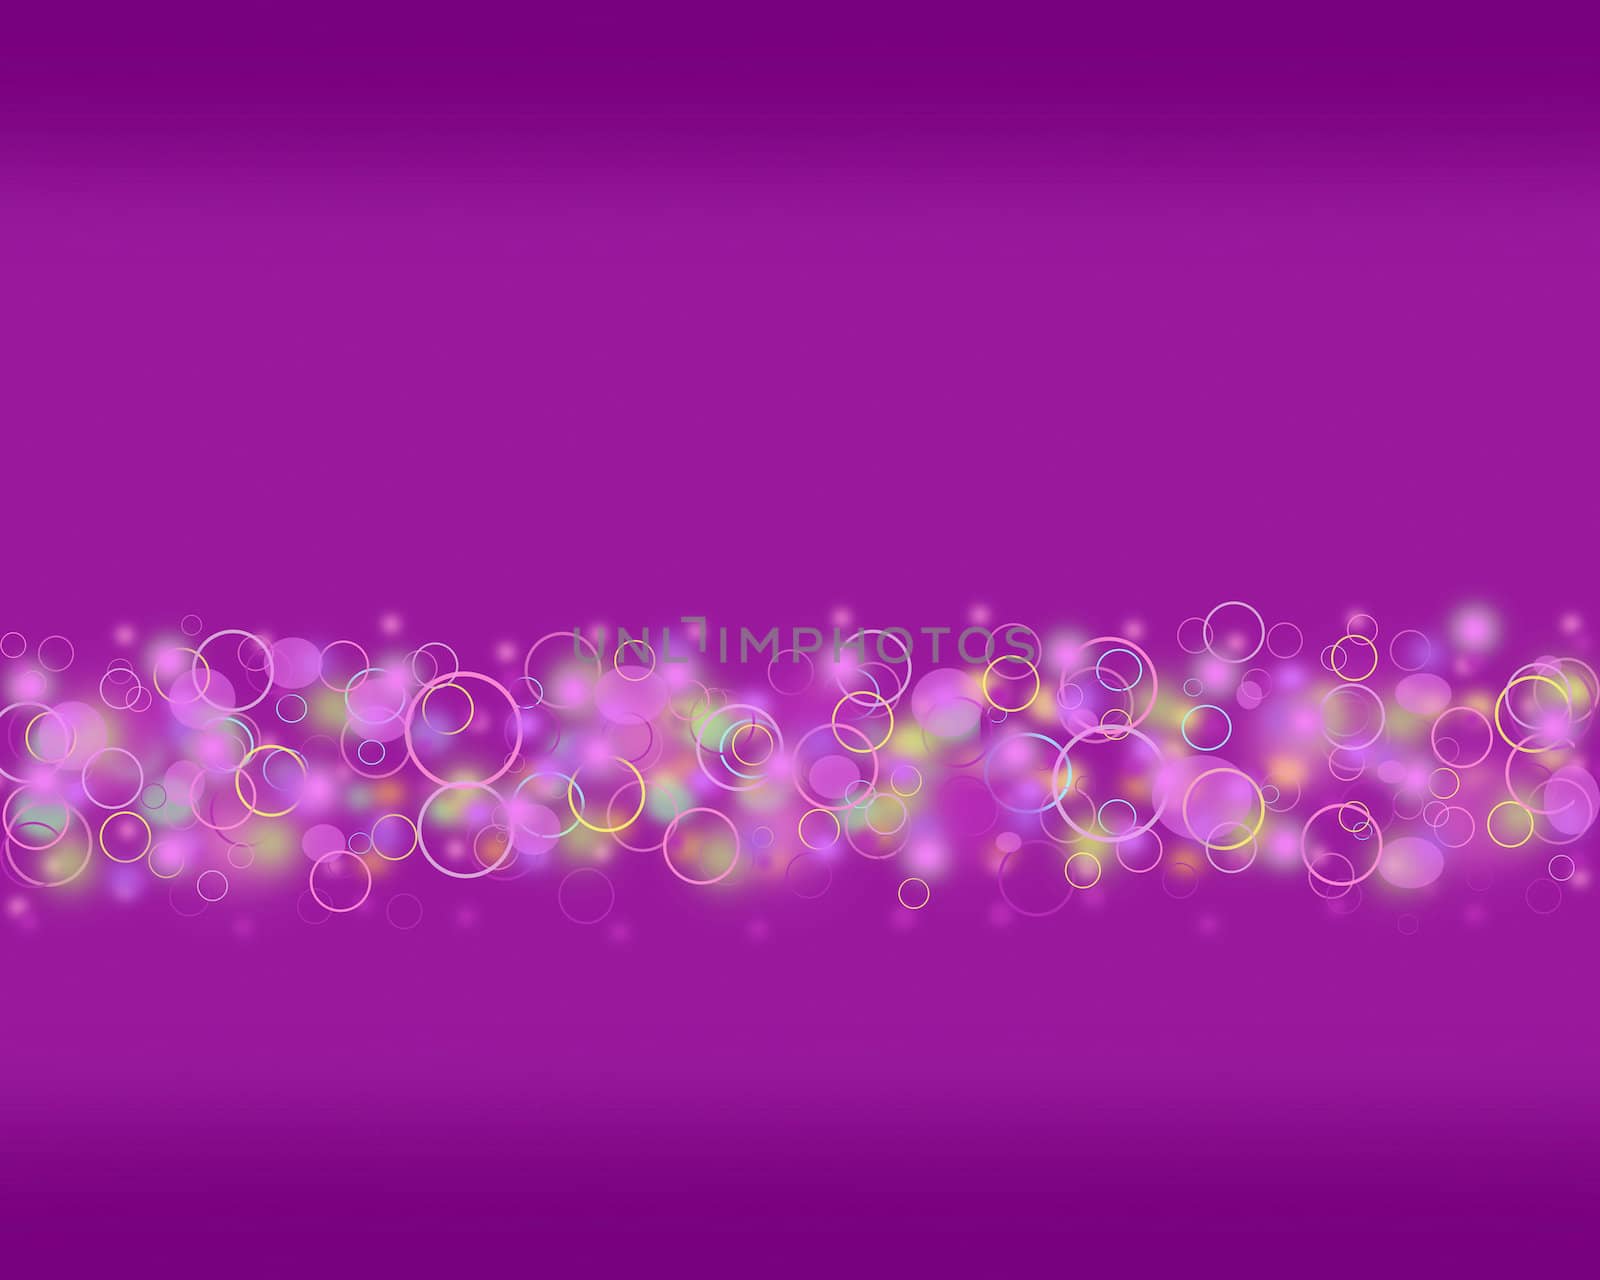 Abstract purple circle background by molly70photo